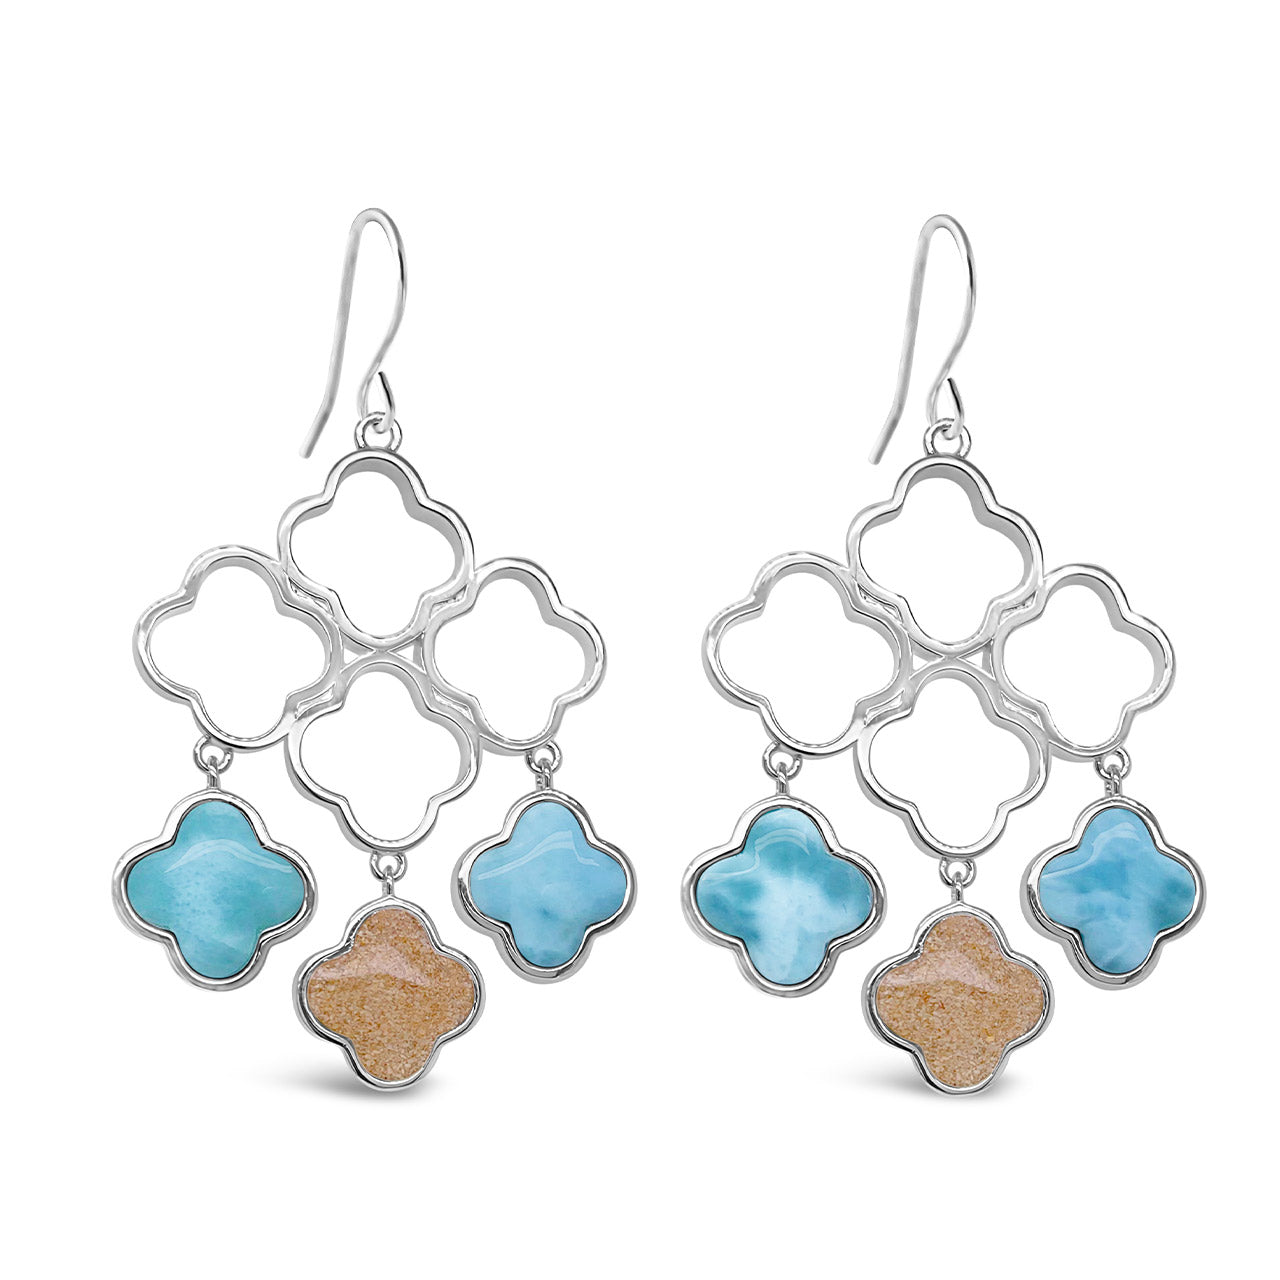 Dune Jewelry Dune Jewelry - Vanessa Earrings  - Larimar & LBI Sand/Shells S/S available at The Good Life Boutique